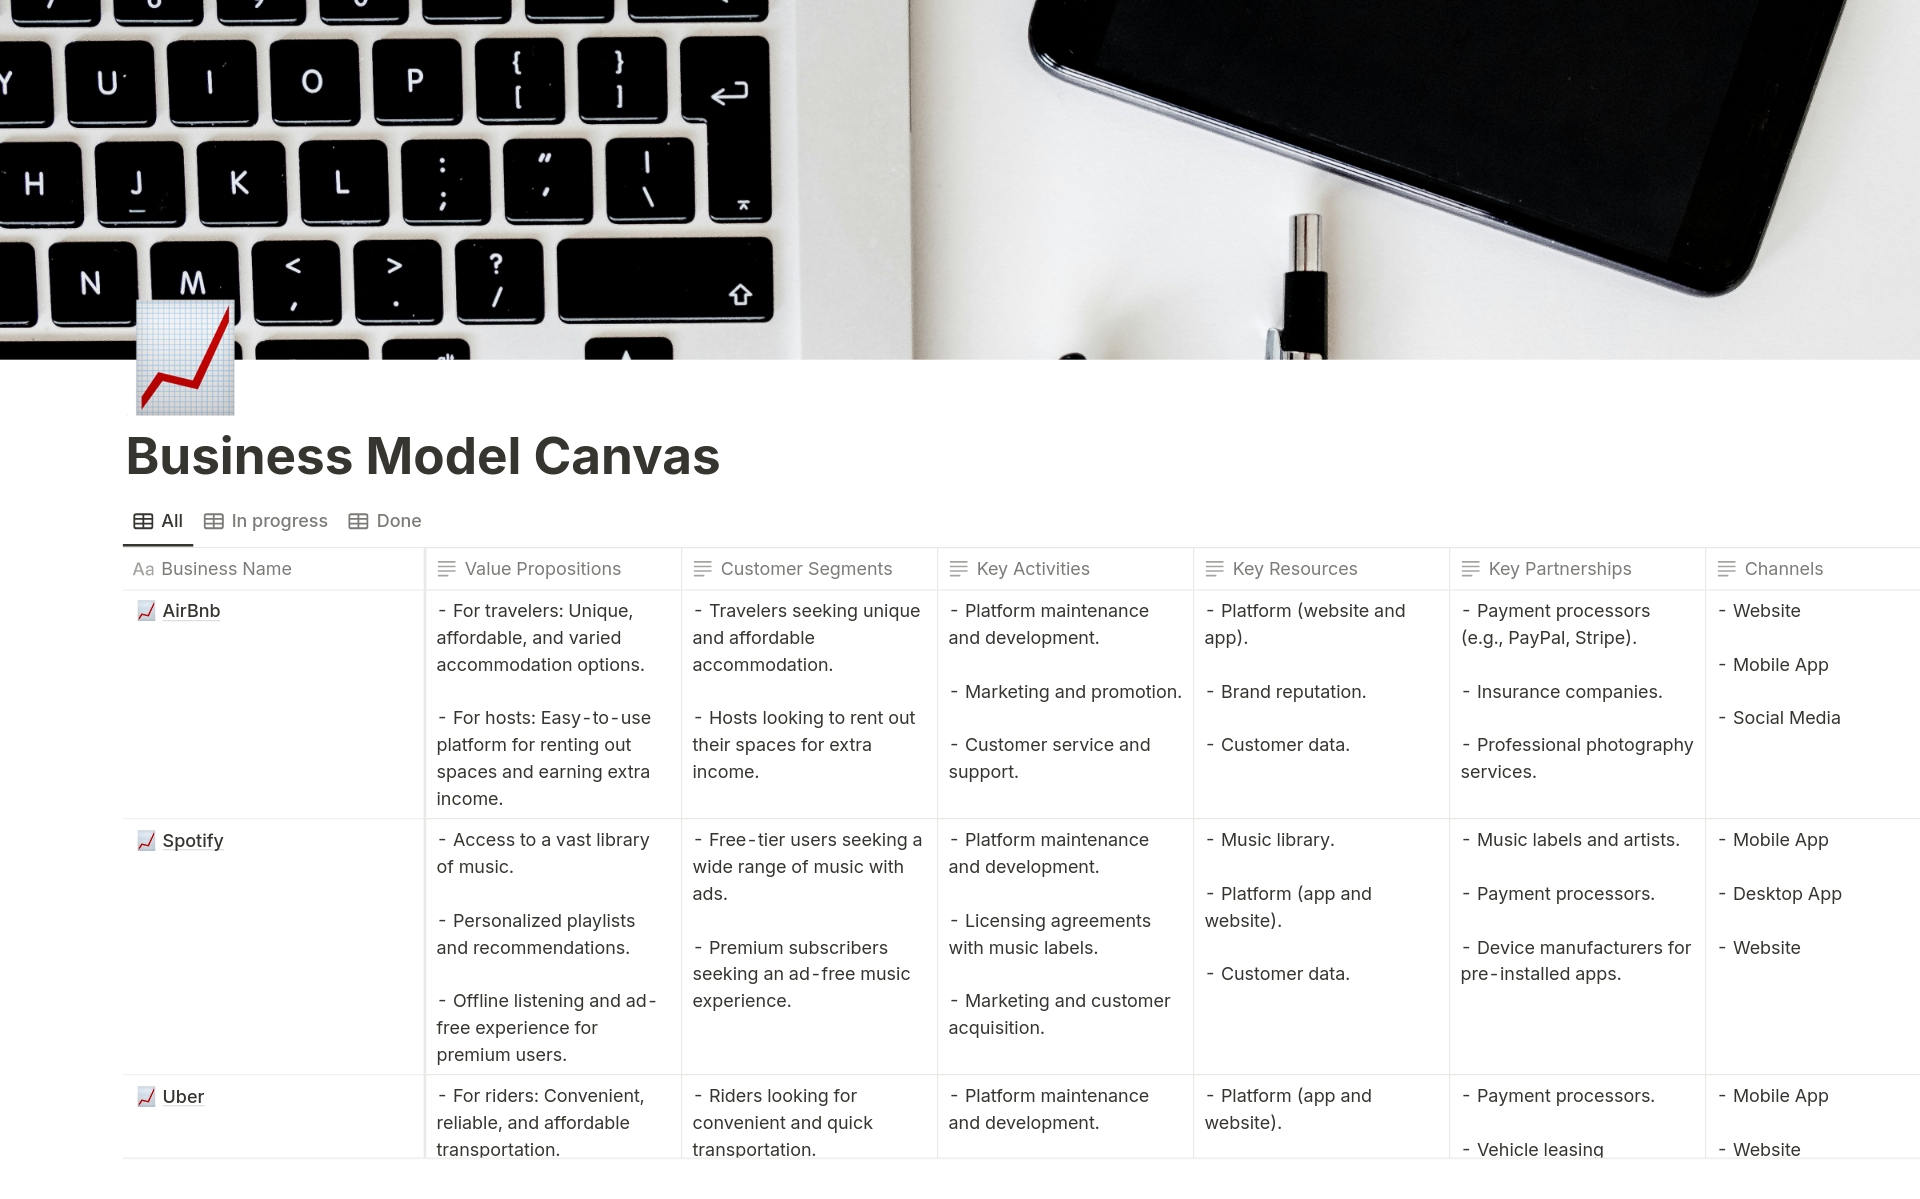 This Business Model Canvas Notion template is designed to help you map out your business ideas and streamline your planning process. Ideal for entrepreneurs and strategists. Start using it today to take a structured approach to building your business.